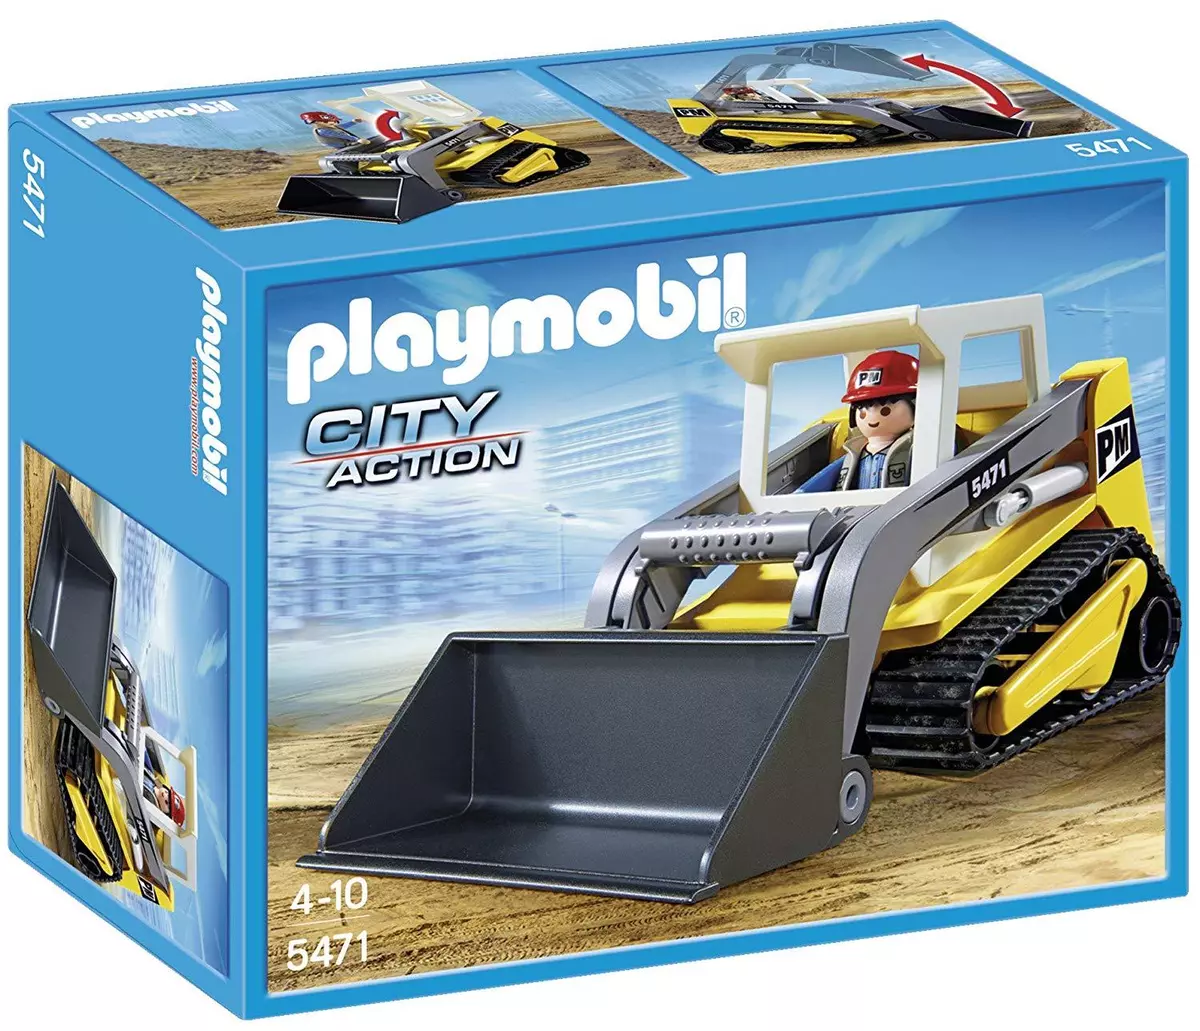 Bare syndrome Migration PLAYMOBIL 5471 Compact Excavator New sealed OOP | eBay